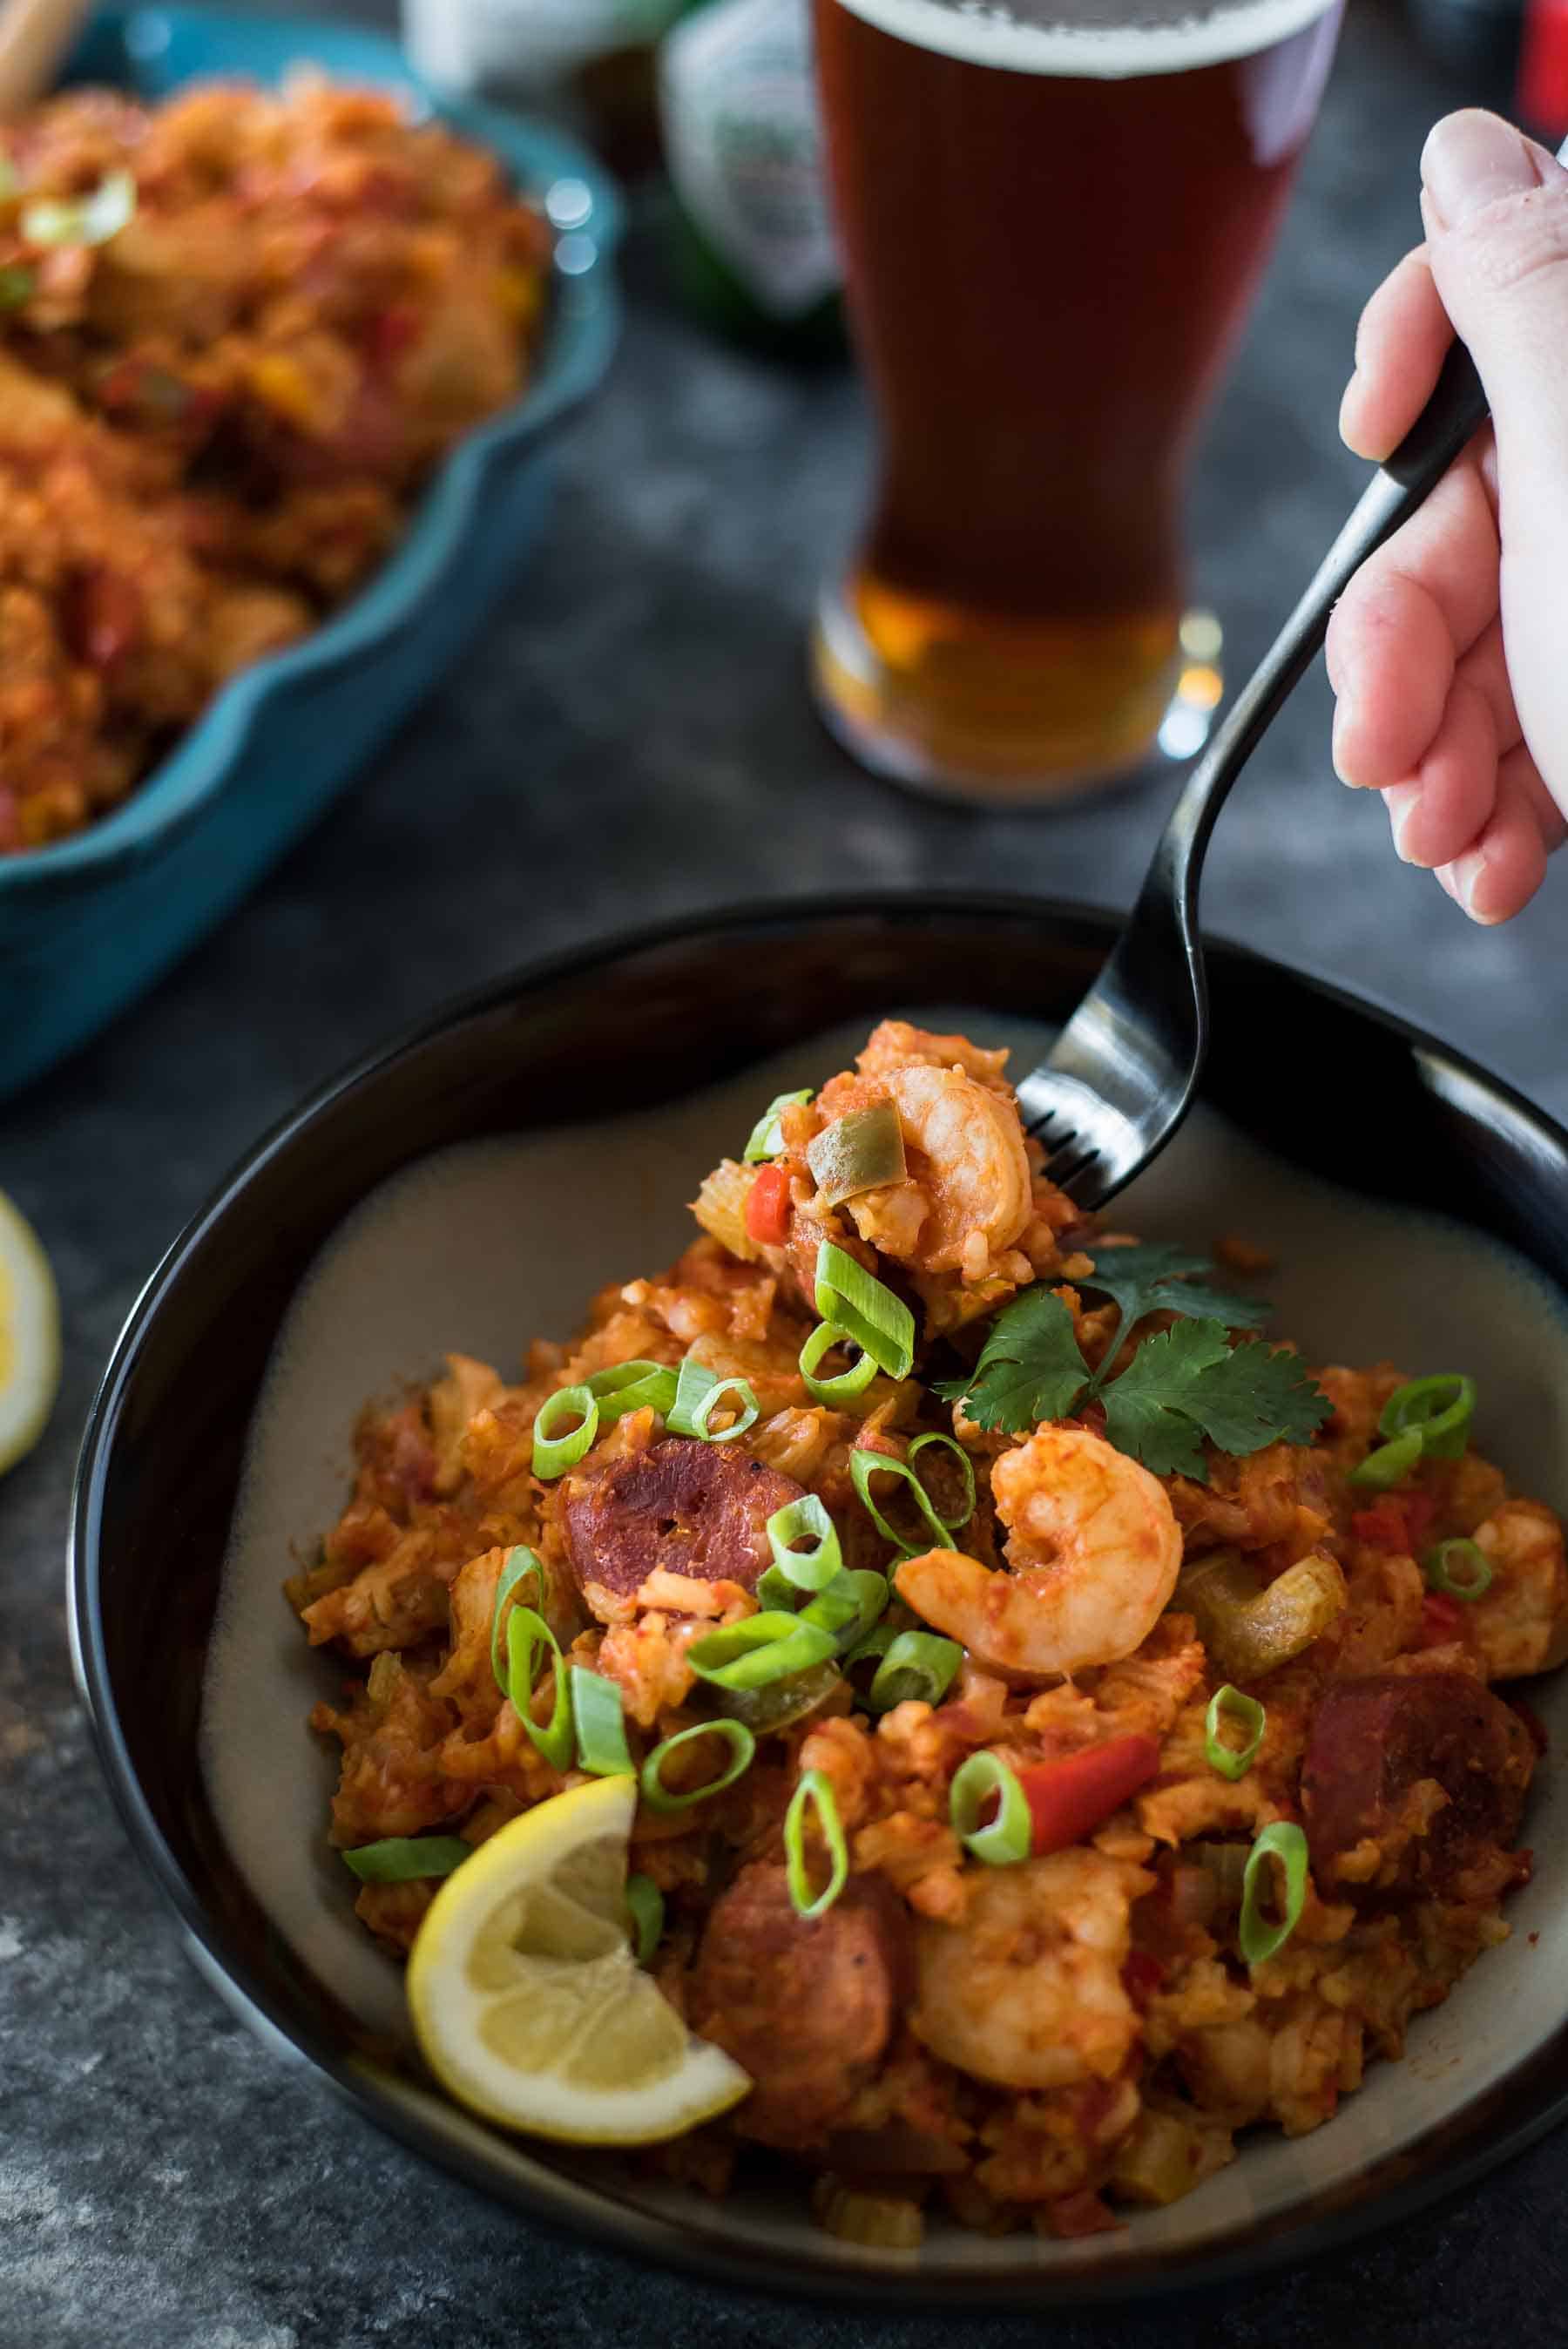 Mardi Gras isn't complete without some Creole food, so throw this Slow Cooker Jambalaya on while you hit up a parade or bake some beignets! Andouille sausage, chicken, and shrimp marry with Cajun-spiced rice and vegetables in this easy weekday or weekend meal.